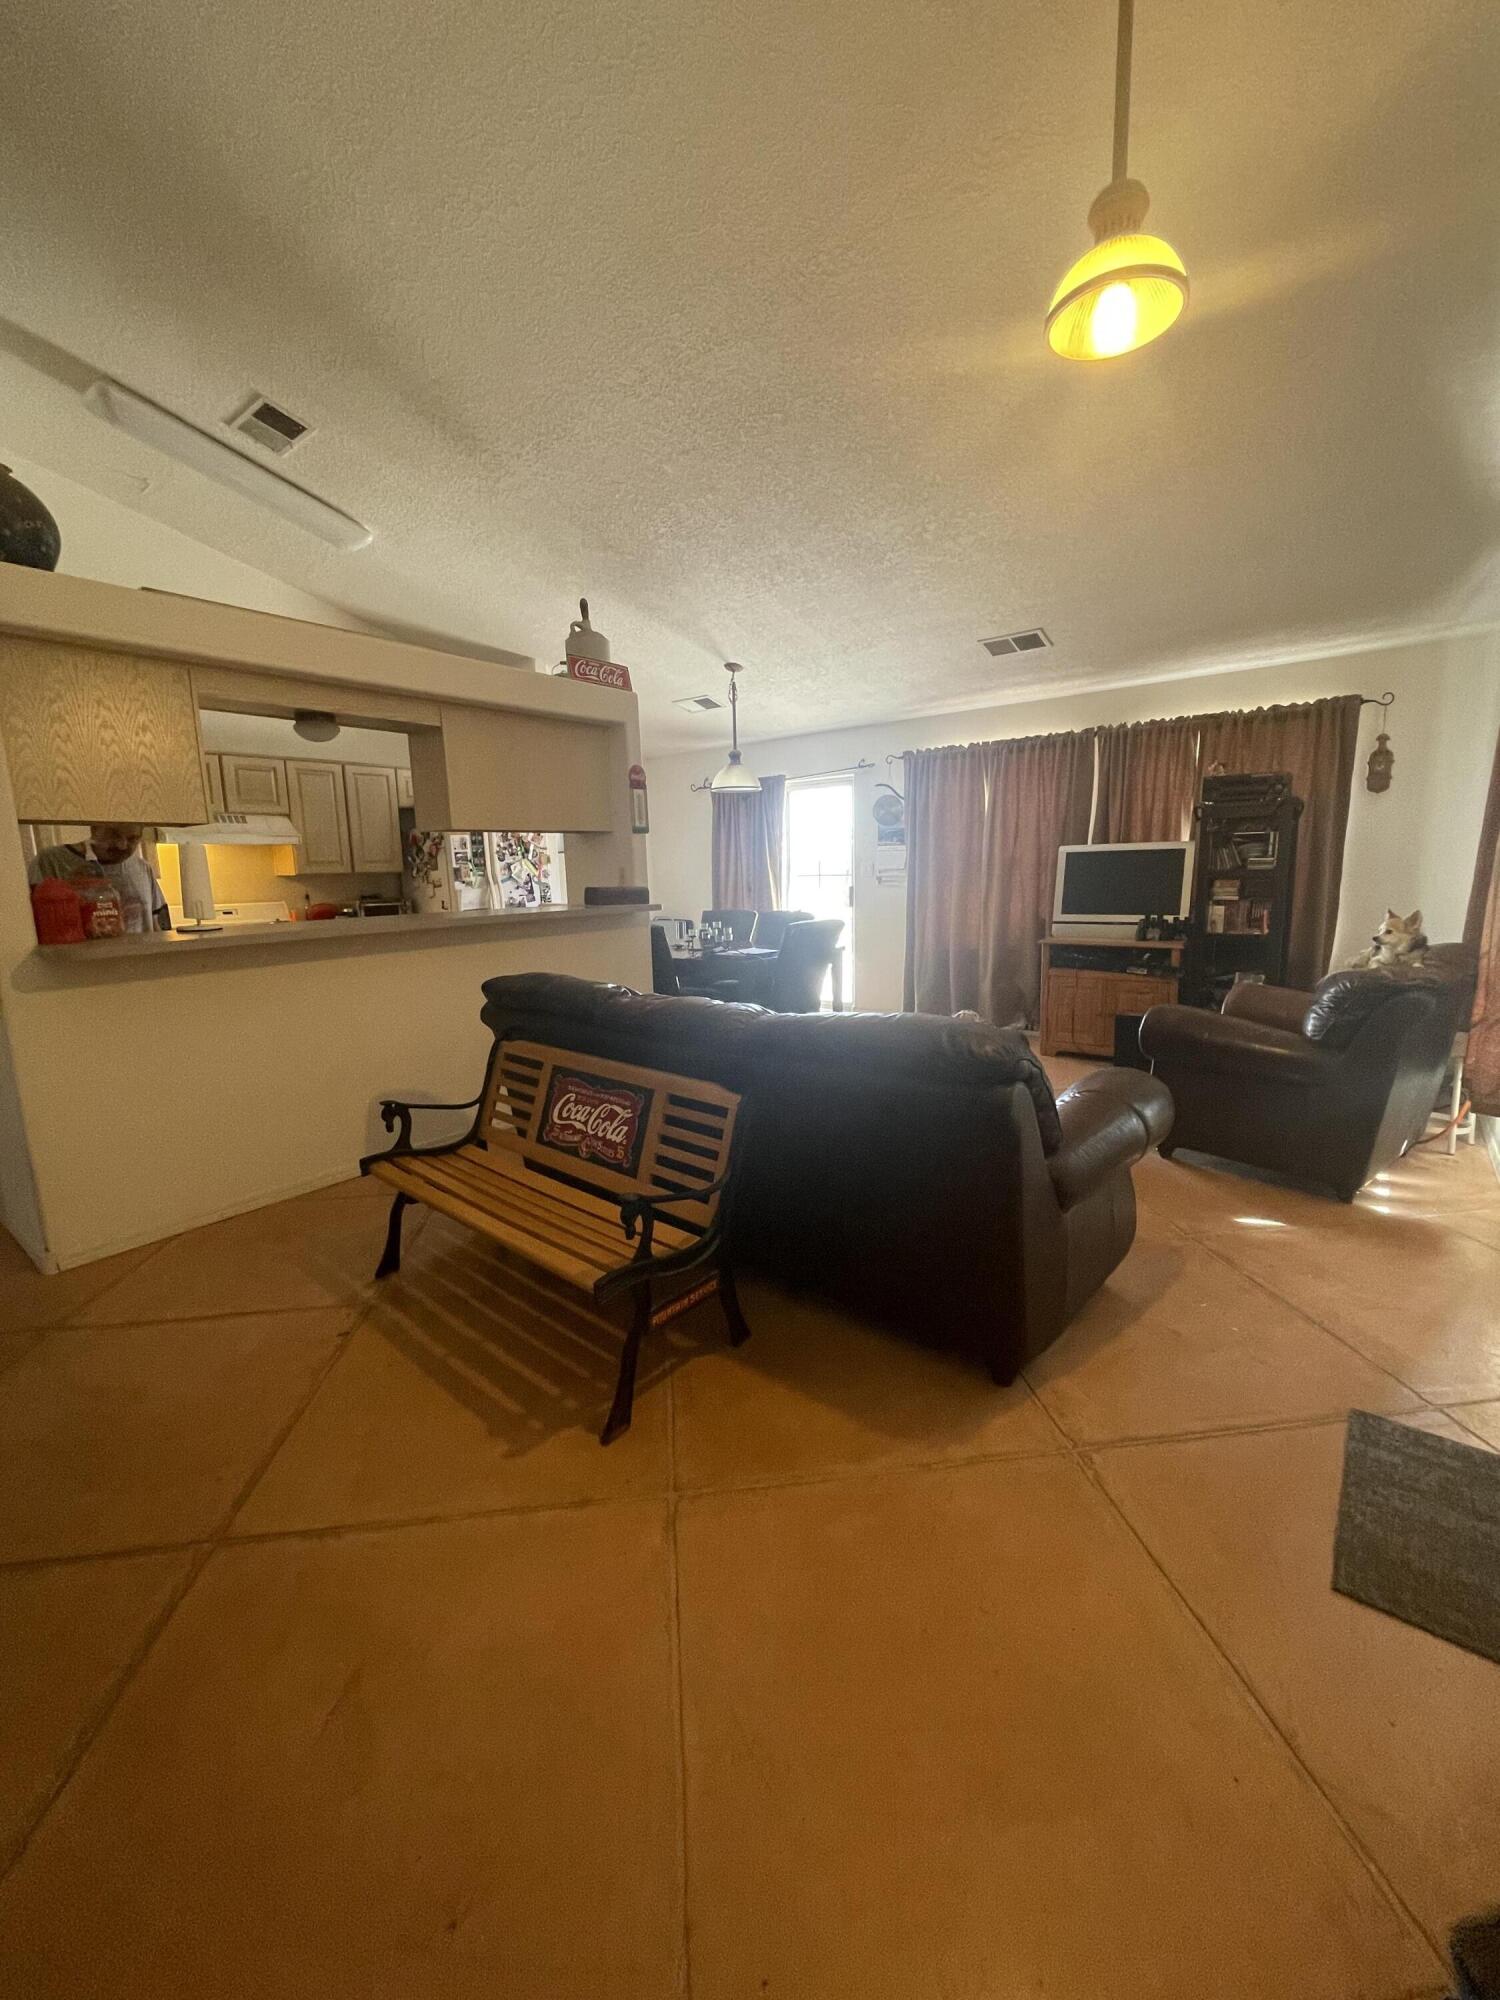 2304 Tompiro Road NW, Albuquerque, New Mexico 87120, 3 Bedrooms Bedrooms, ,2 BathroomsBathrooms,Residential,For Sale,2304 Tompiro Road NW,1061986